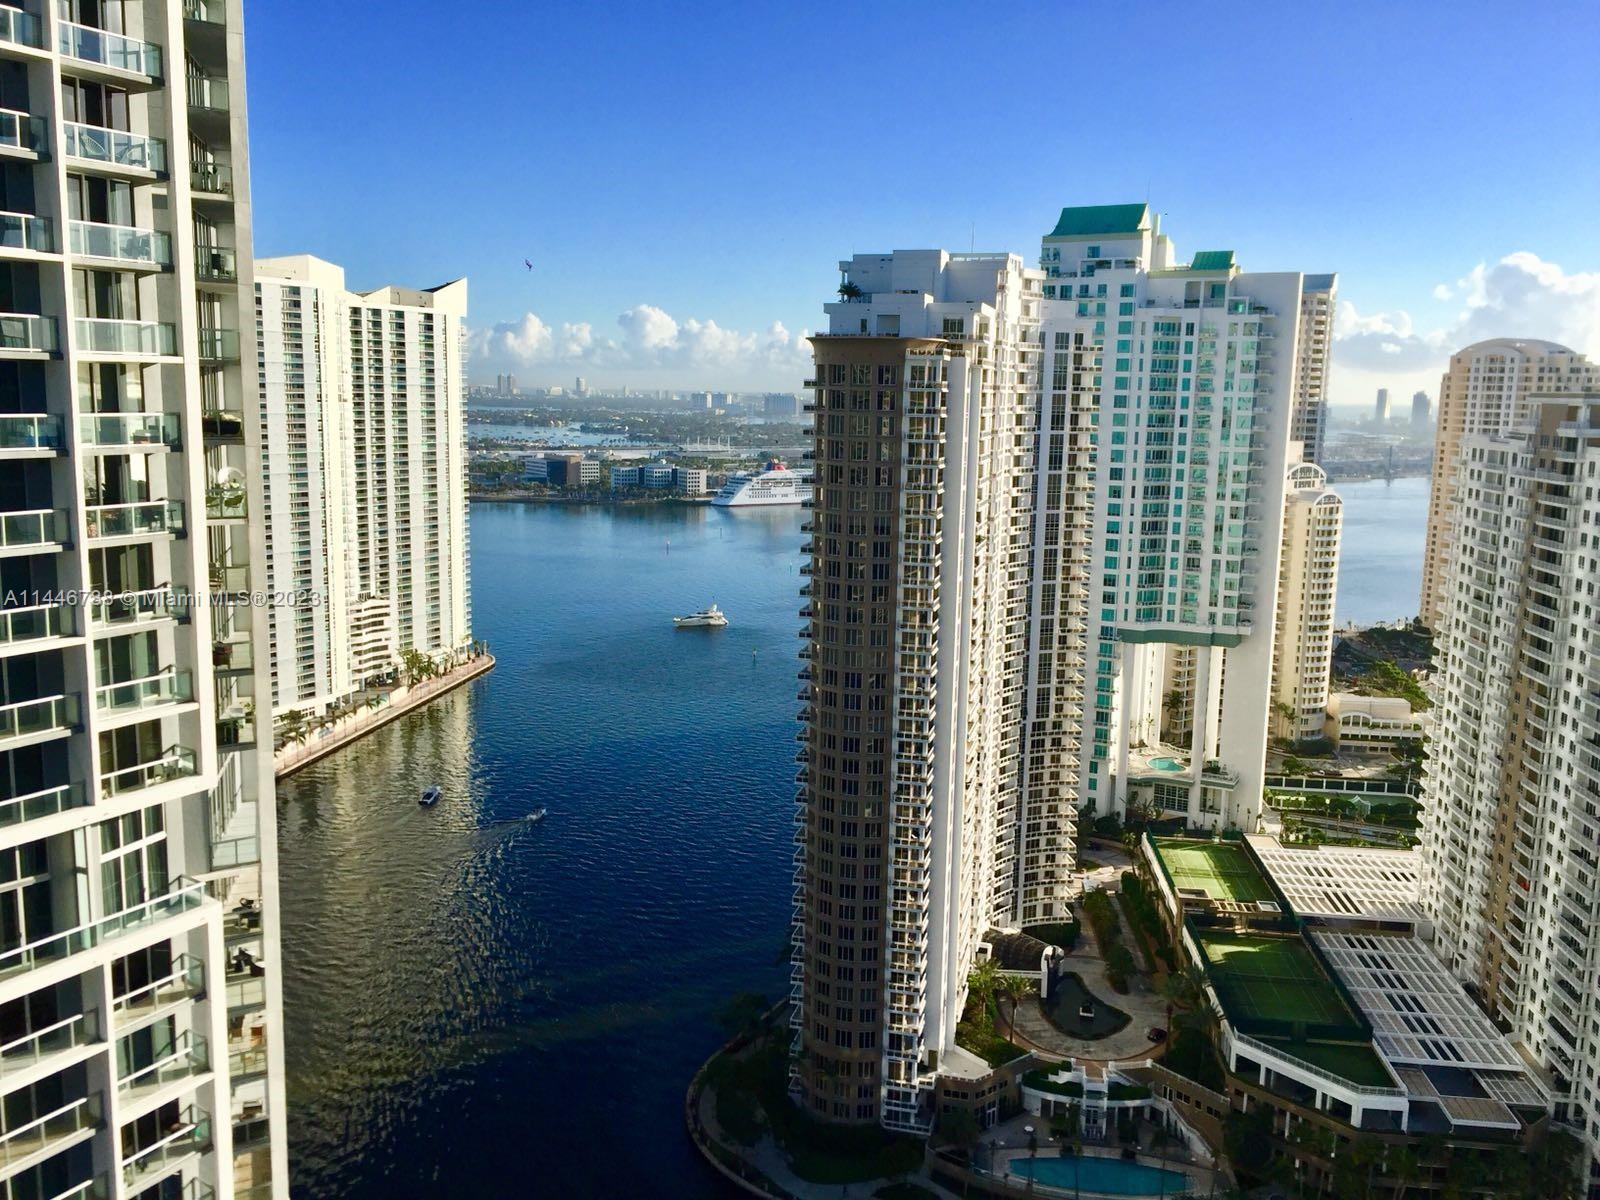 LIVE IN THE HEART OF BRICKELL AND WALK TO SHOPS & RESTAURANTS! THIS IS UNFURNISHED 2-BEDROOM/2-BATH CORNER UNIT, AT ICONBRICKELL TOWER TWO. UNIT IN 34TH FLOOR, VIEWS OF BAY, POOL AND CITY. UNIT HAS TILE, WALK-IN CLOSET, ITALIAN CABINETS, WOLF/SUBZERO KITC HEN APPLIANCES. BUILDING OFFERS CABLE/INTERNET & HOT WATER. STATE OF THE ART AMENITIES INCLUDING FITNESS CENTER WITH CLASSES, FULL SERVICE SPA, RESTAURANTS, AND MUCH MORE. PLEASE SUBMIT OFFERS. EASY TO SHOW!